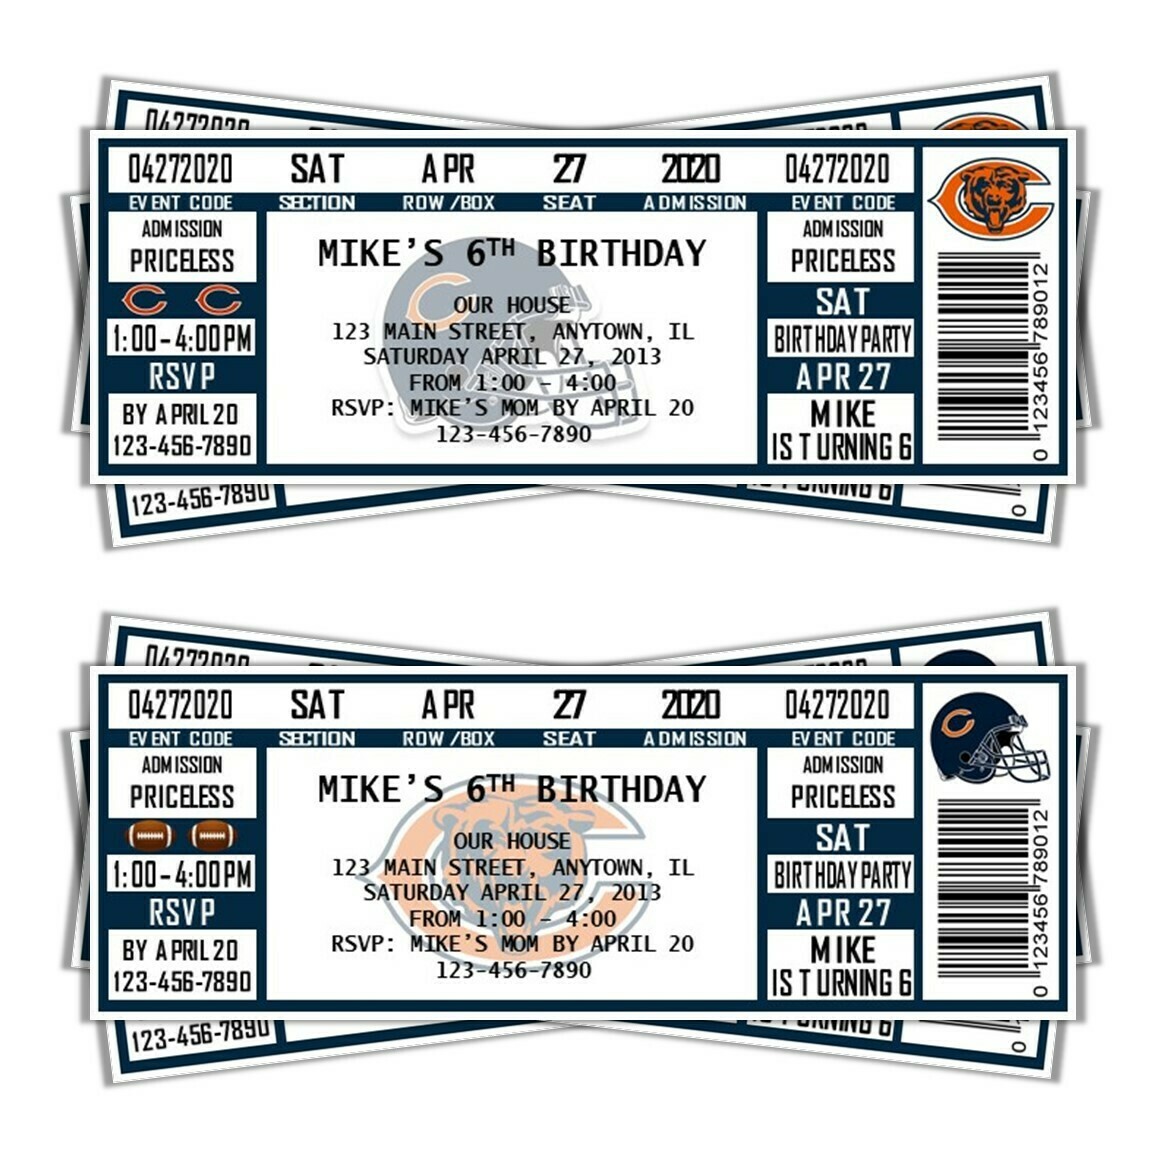 bears game tickets